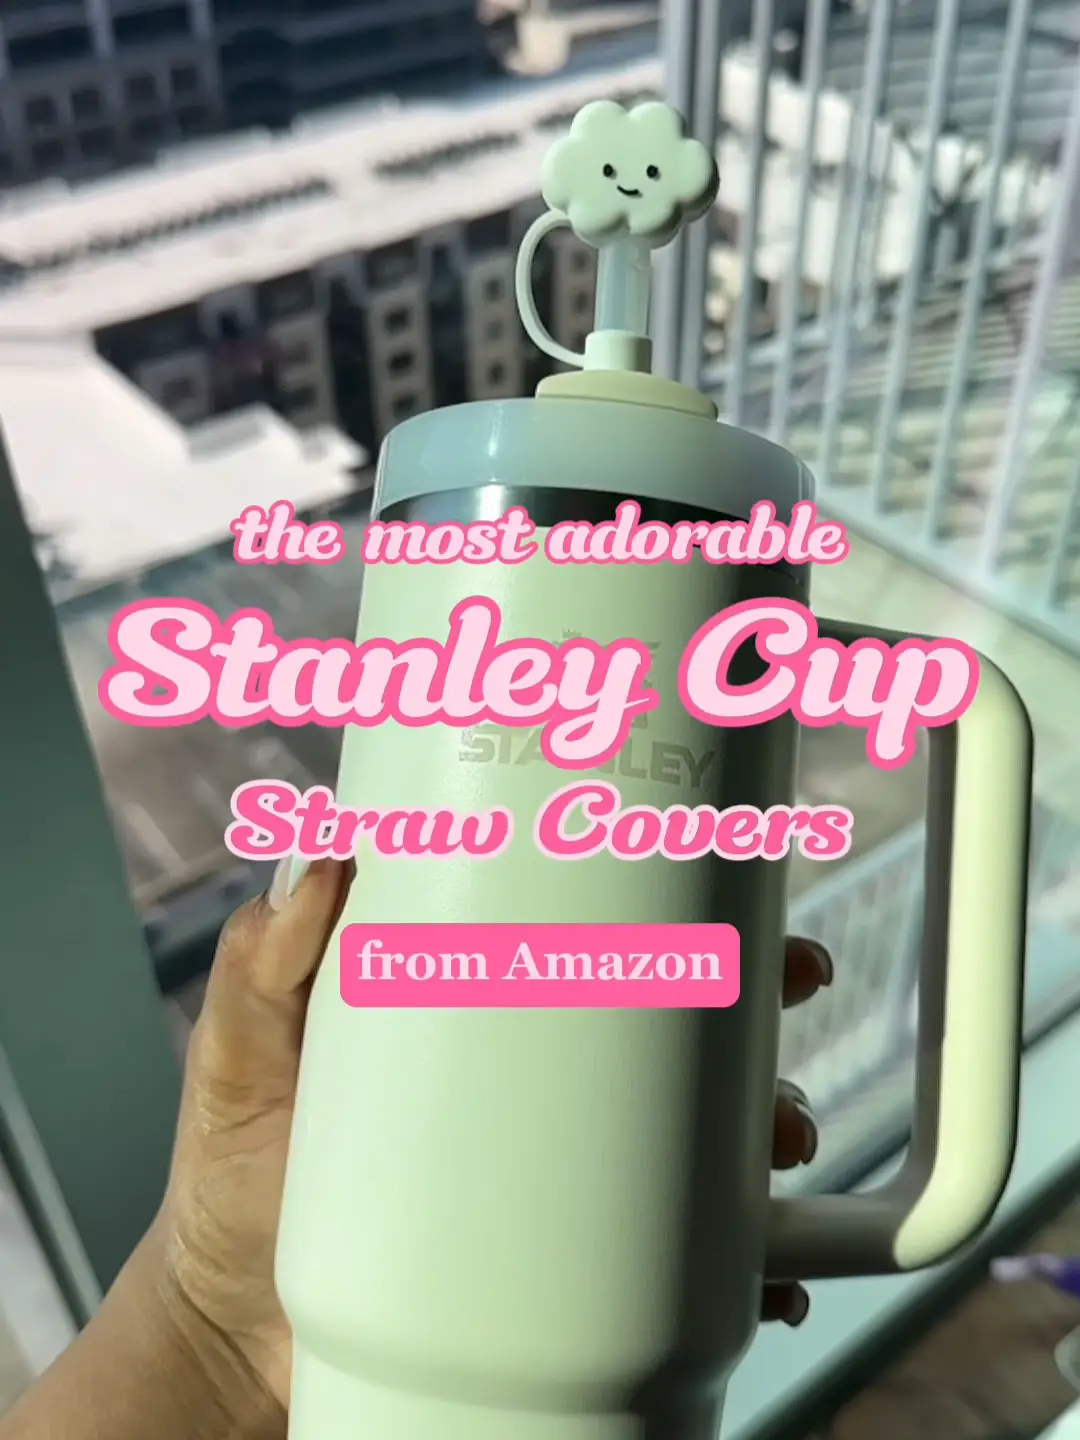 So we're now covering our Stanley straws